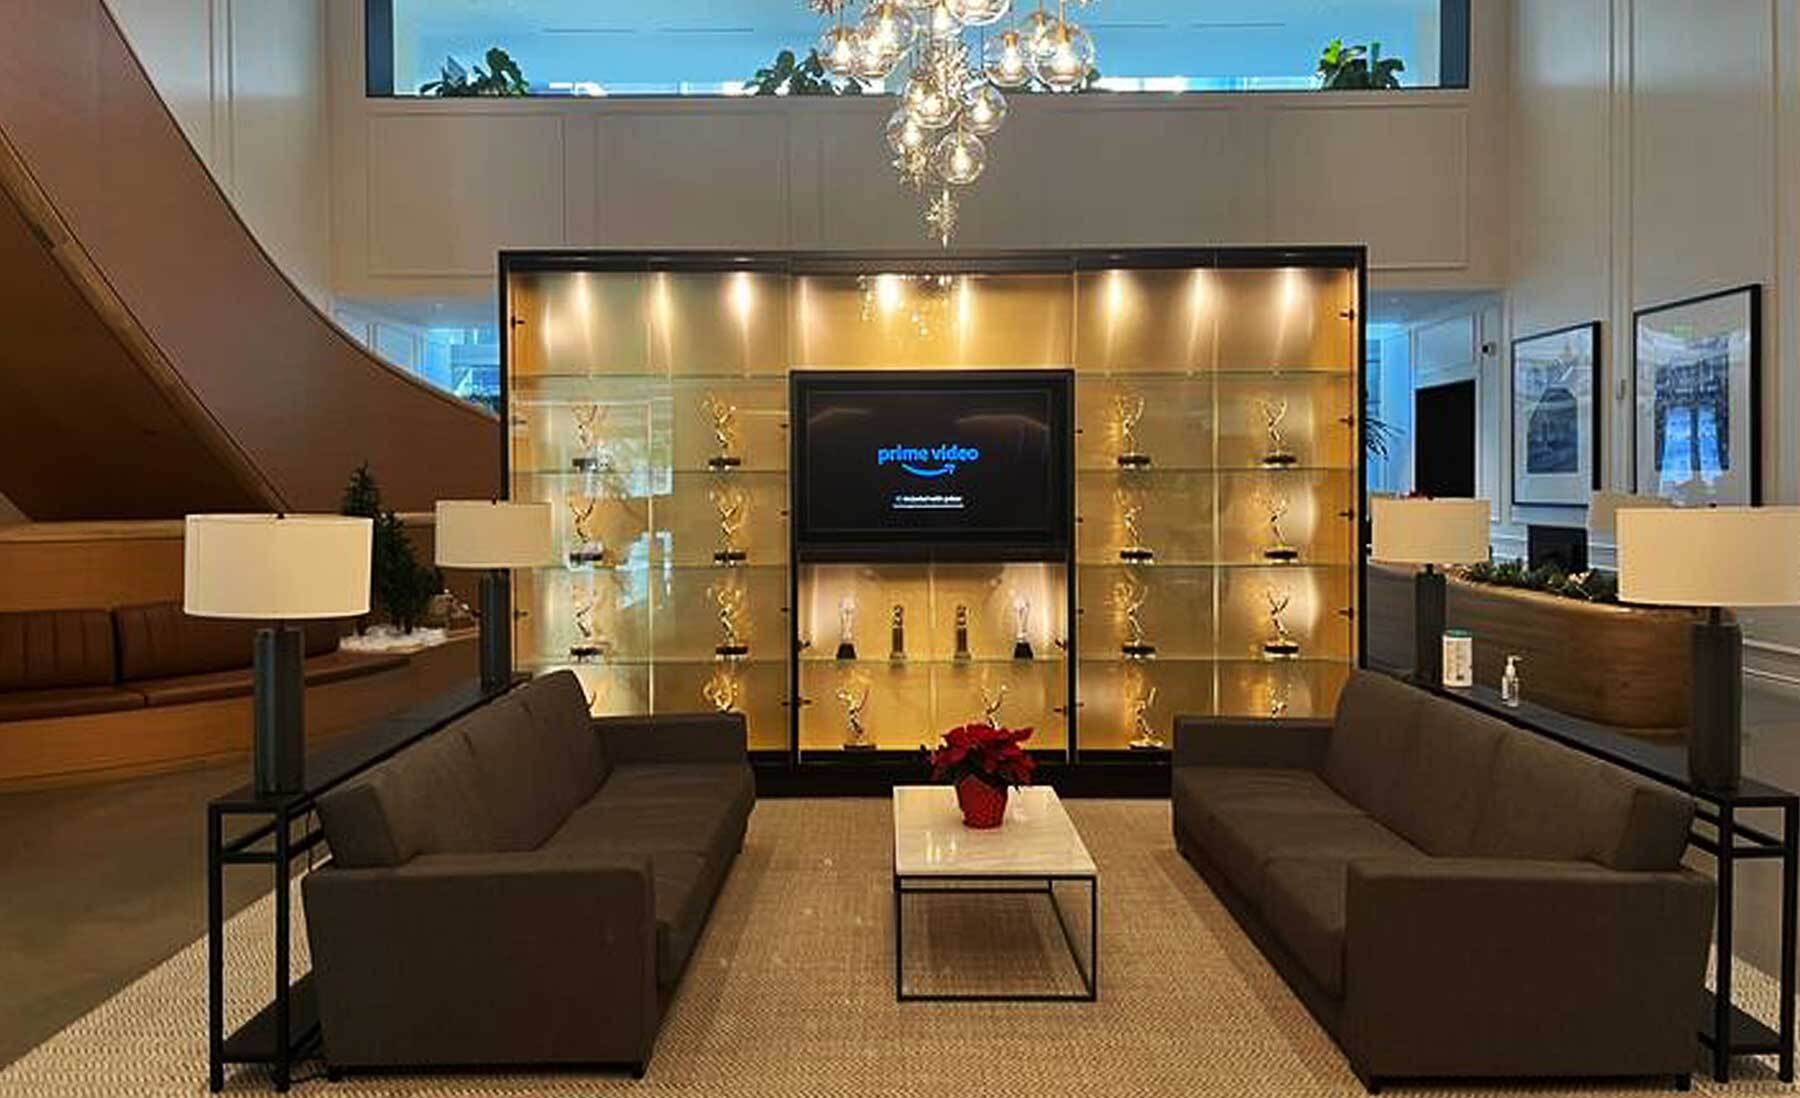 An image of a case of Emmy awards with couches around it in a lobby. There is a screen in the middle that says "Prime Video."